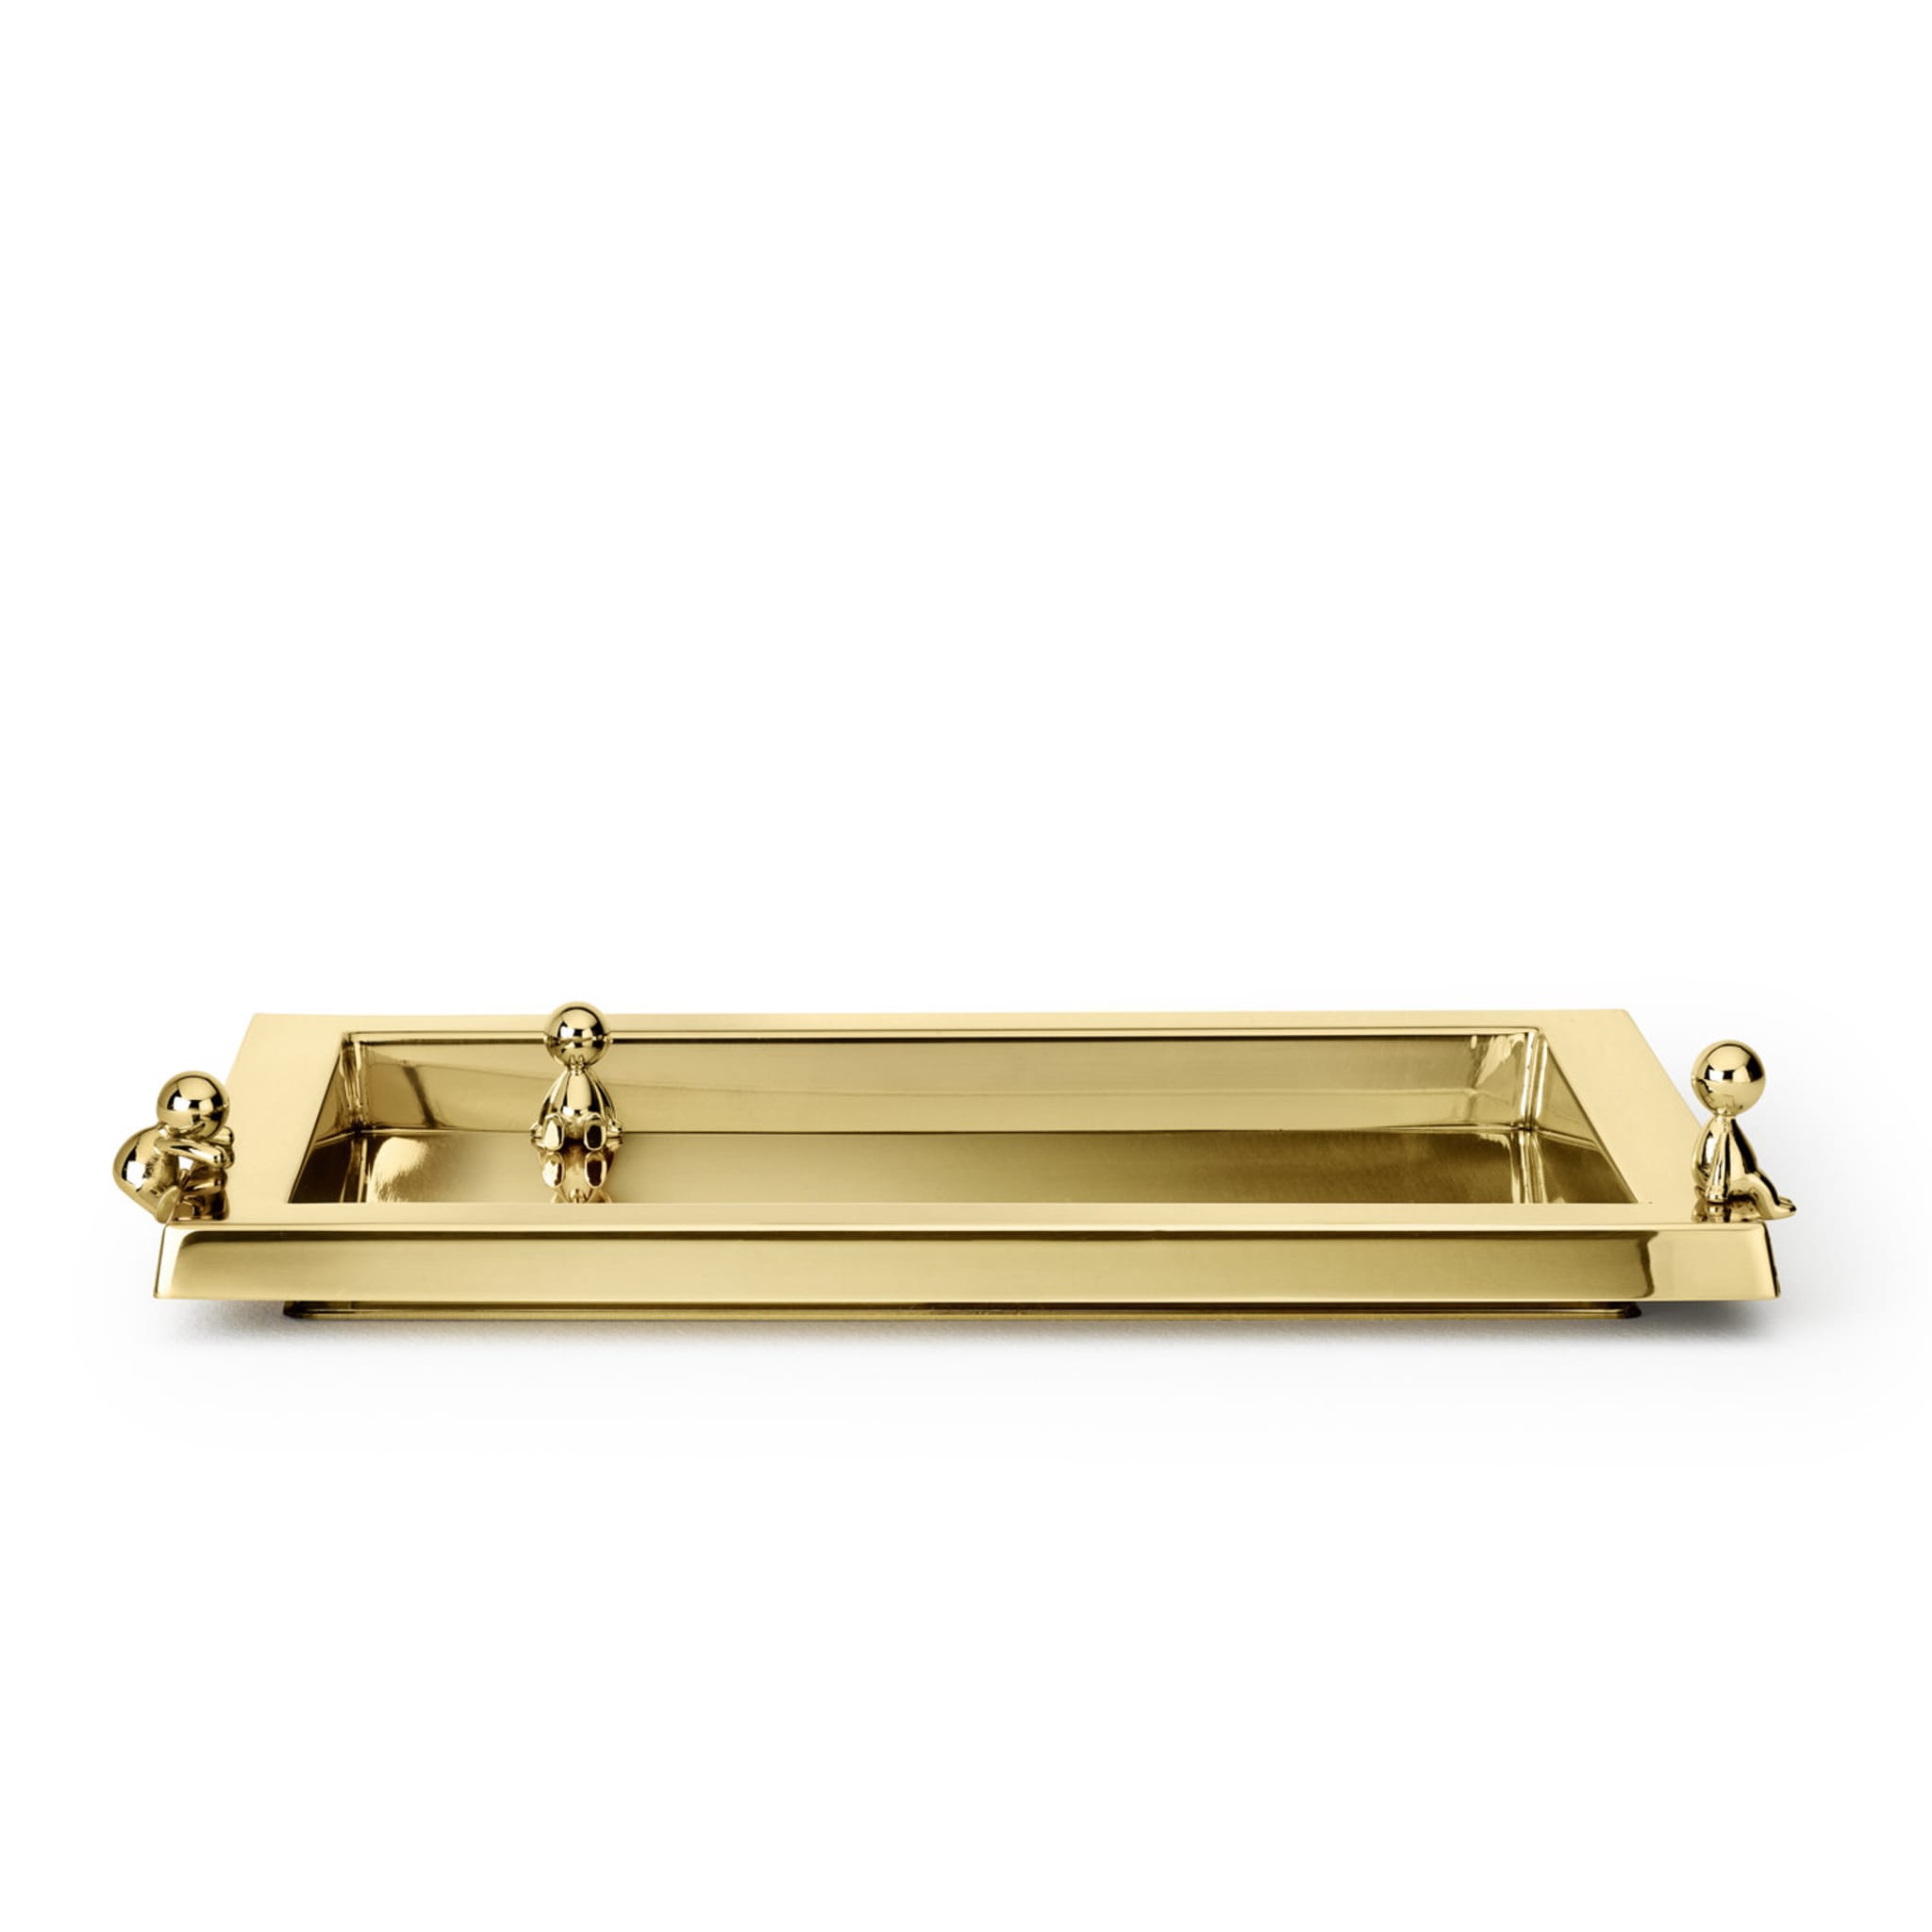 Omini Tray in Polished Brass By Stefano Giovannoni - Alternative view 3